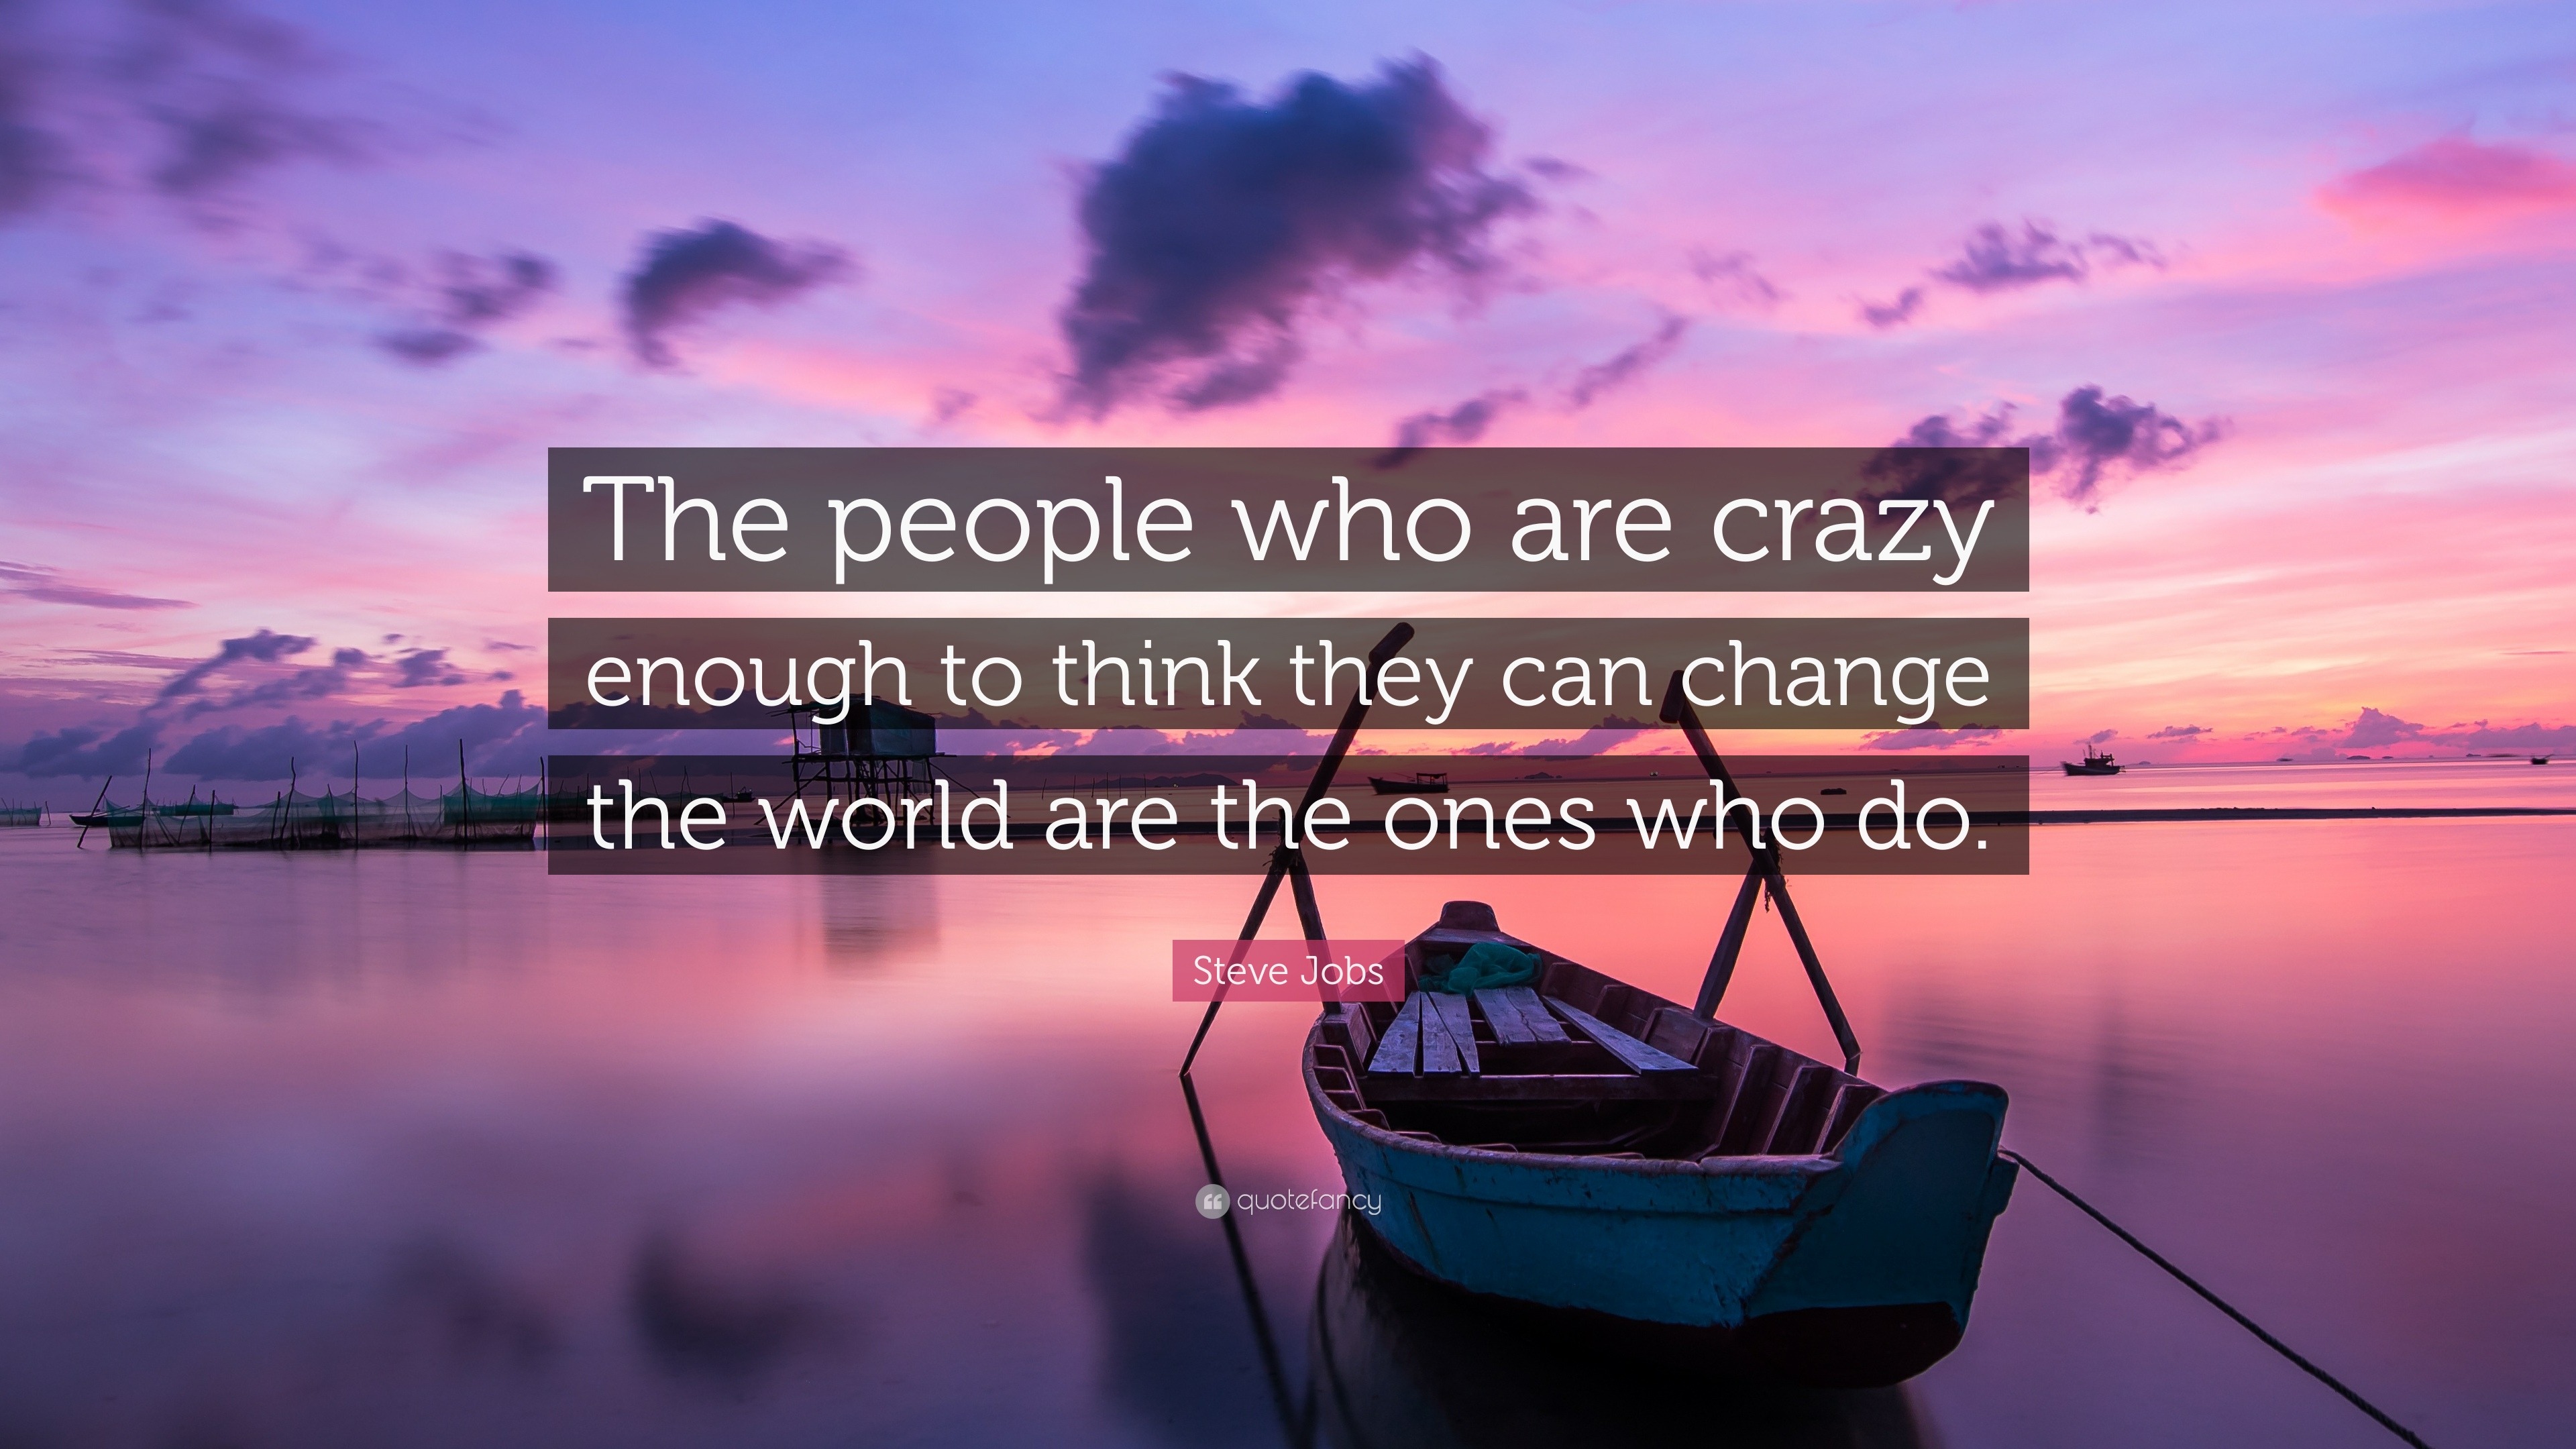 Steve Jobs Quote “The people who are crazy enough to think they can change